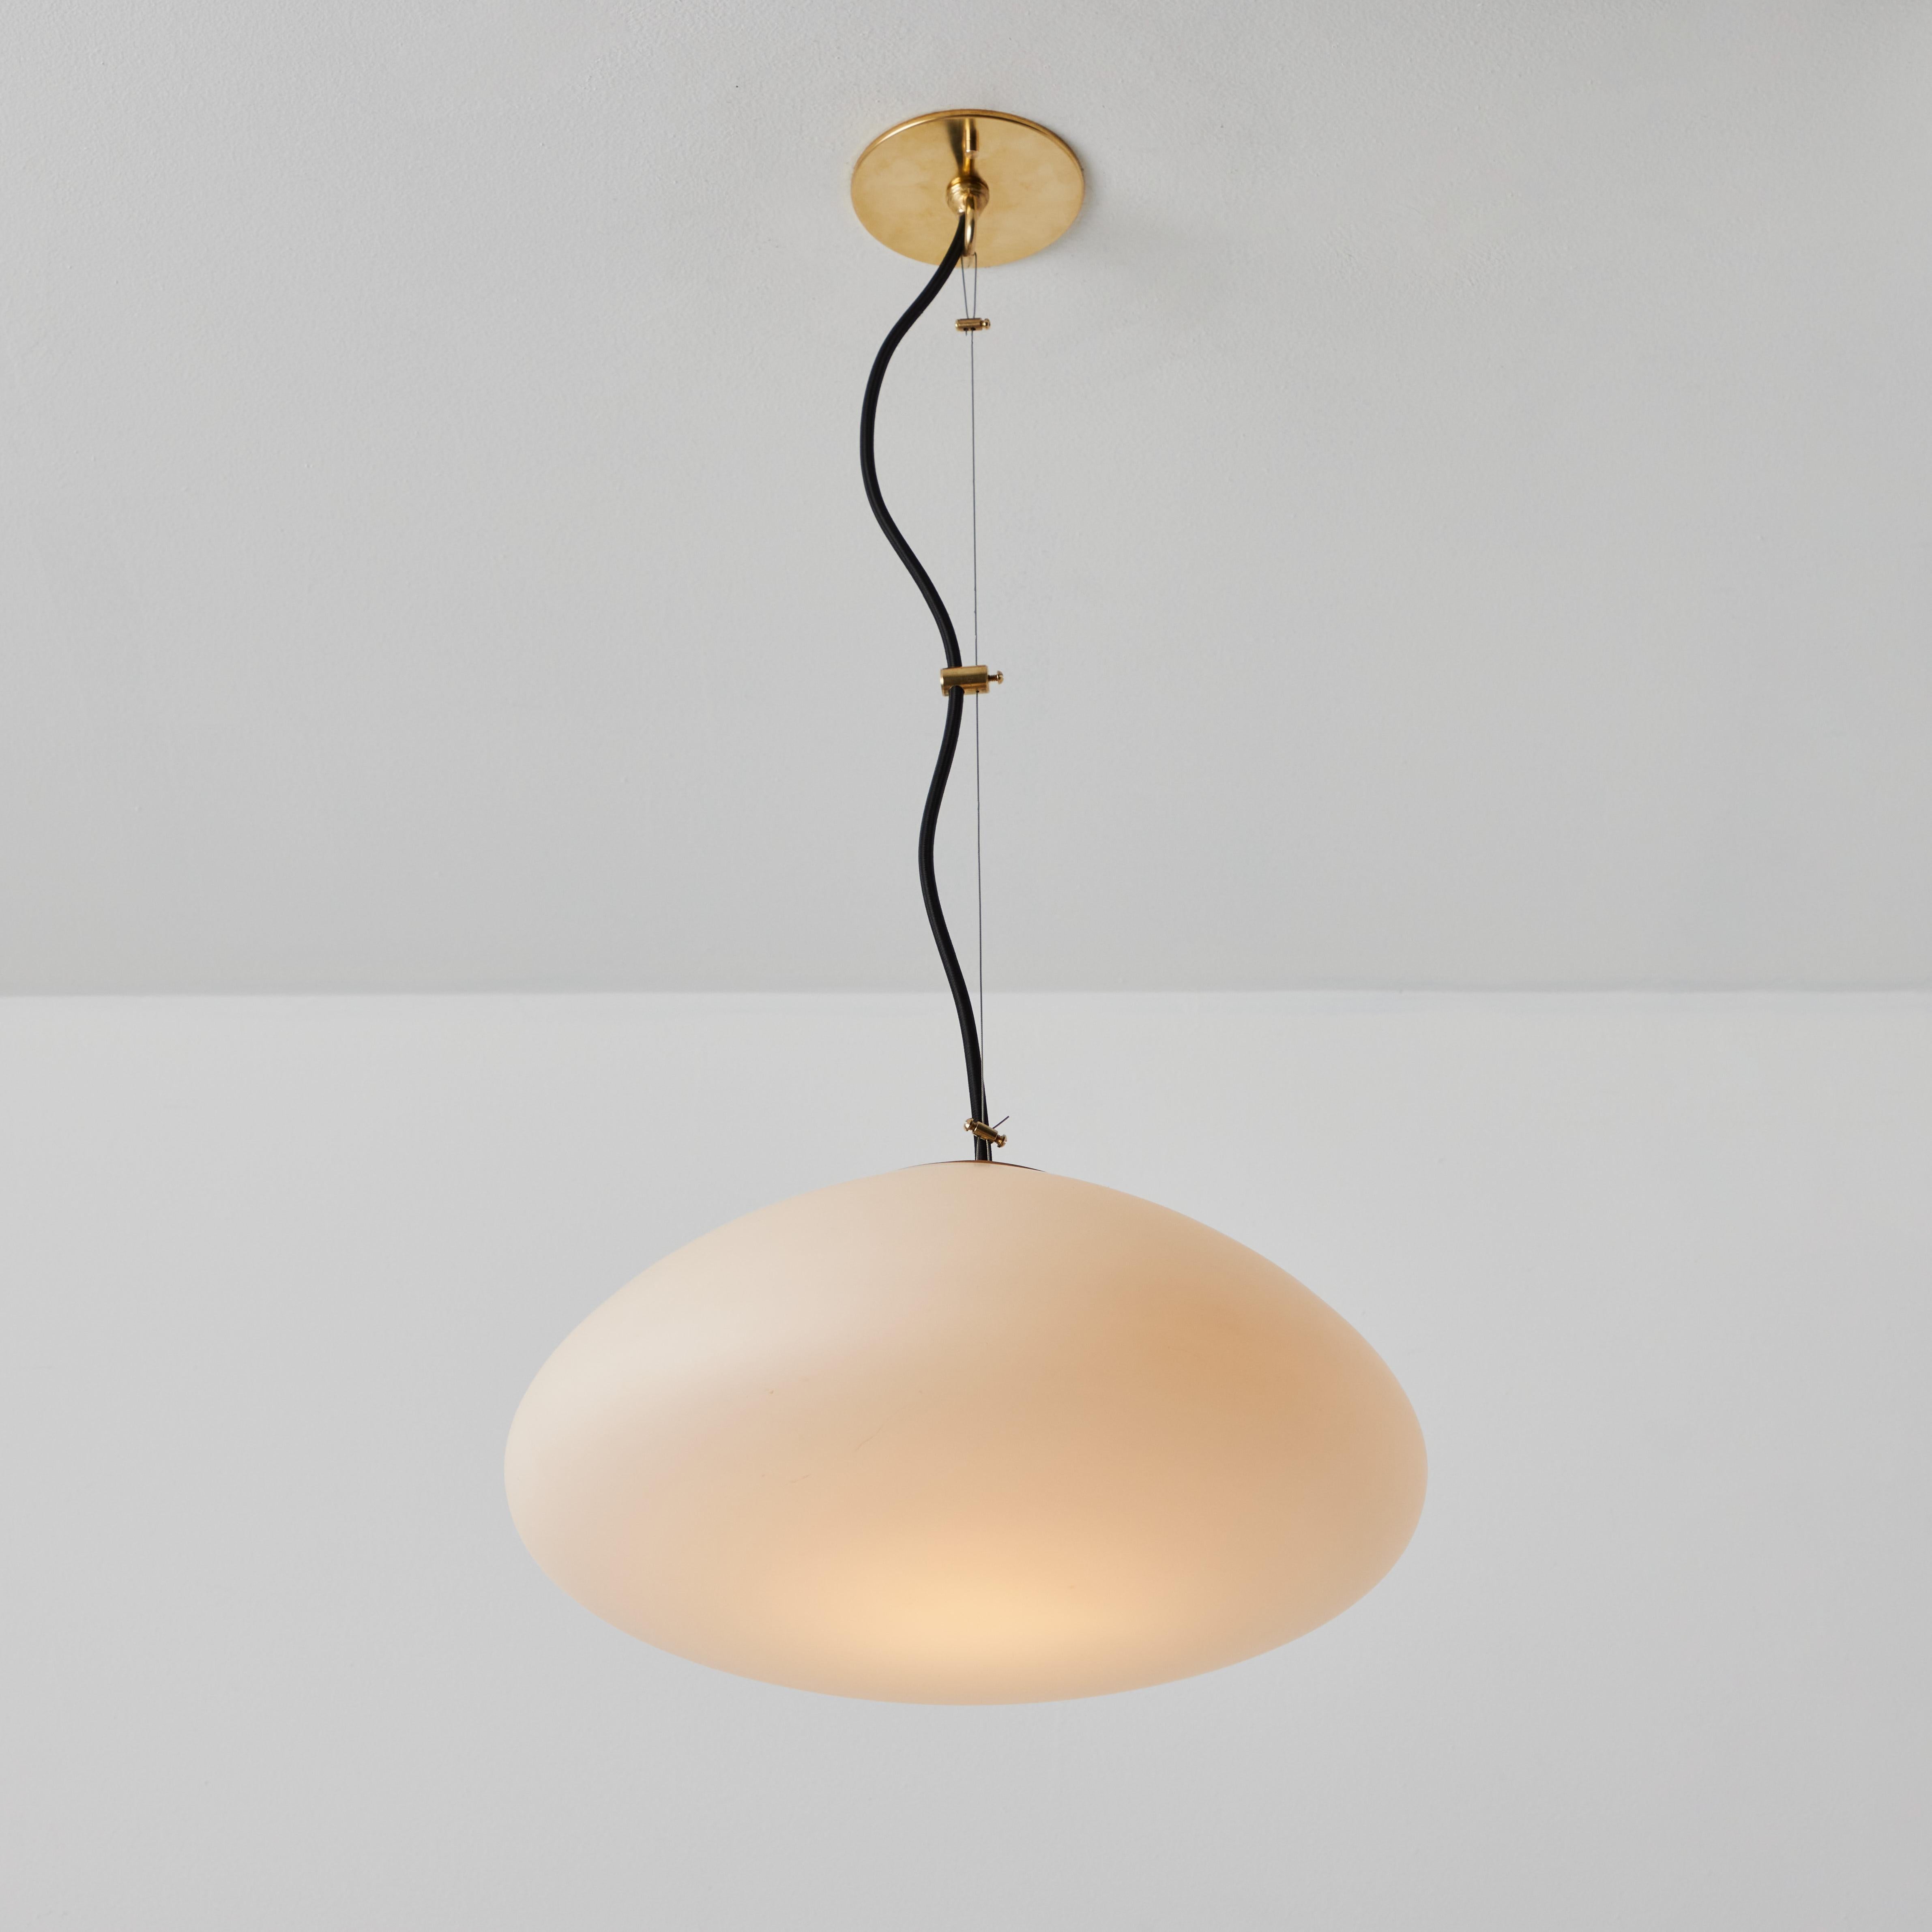 1950s glass & brass suspension lamp Attributed to Stilnovo. A quintessentially 1950s Italian design executed in sculptural opaline glass and brass. A highly functional and refined suspension light of attractive scale and incomparable refinement.